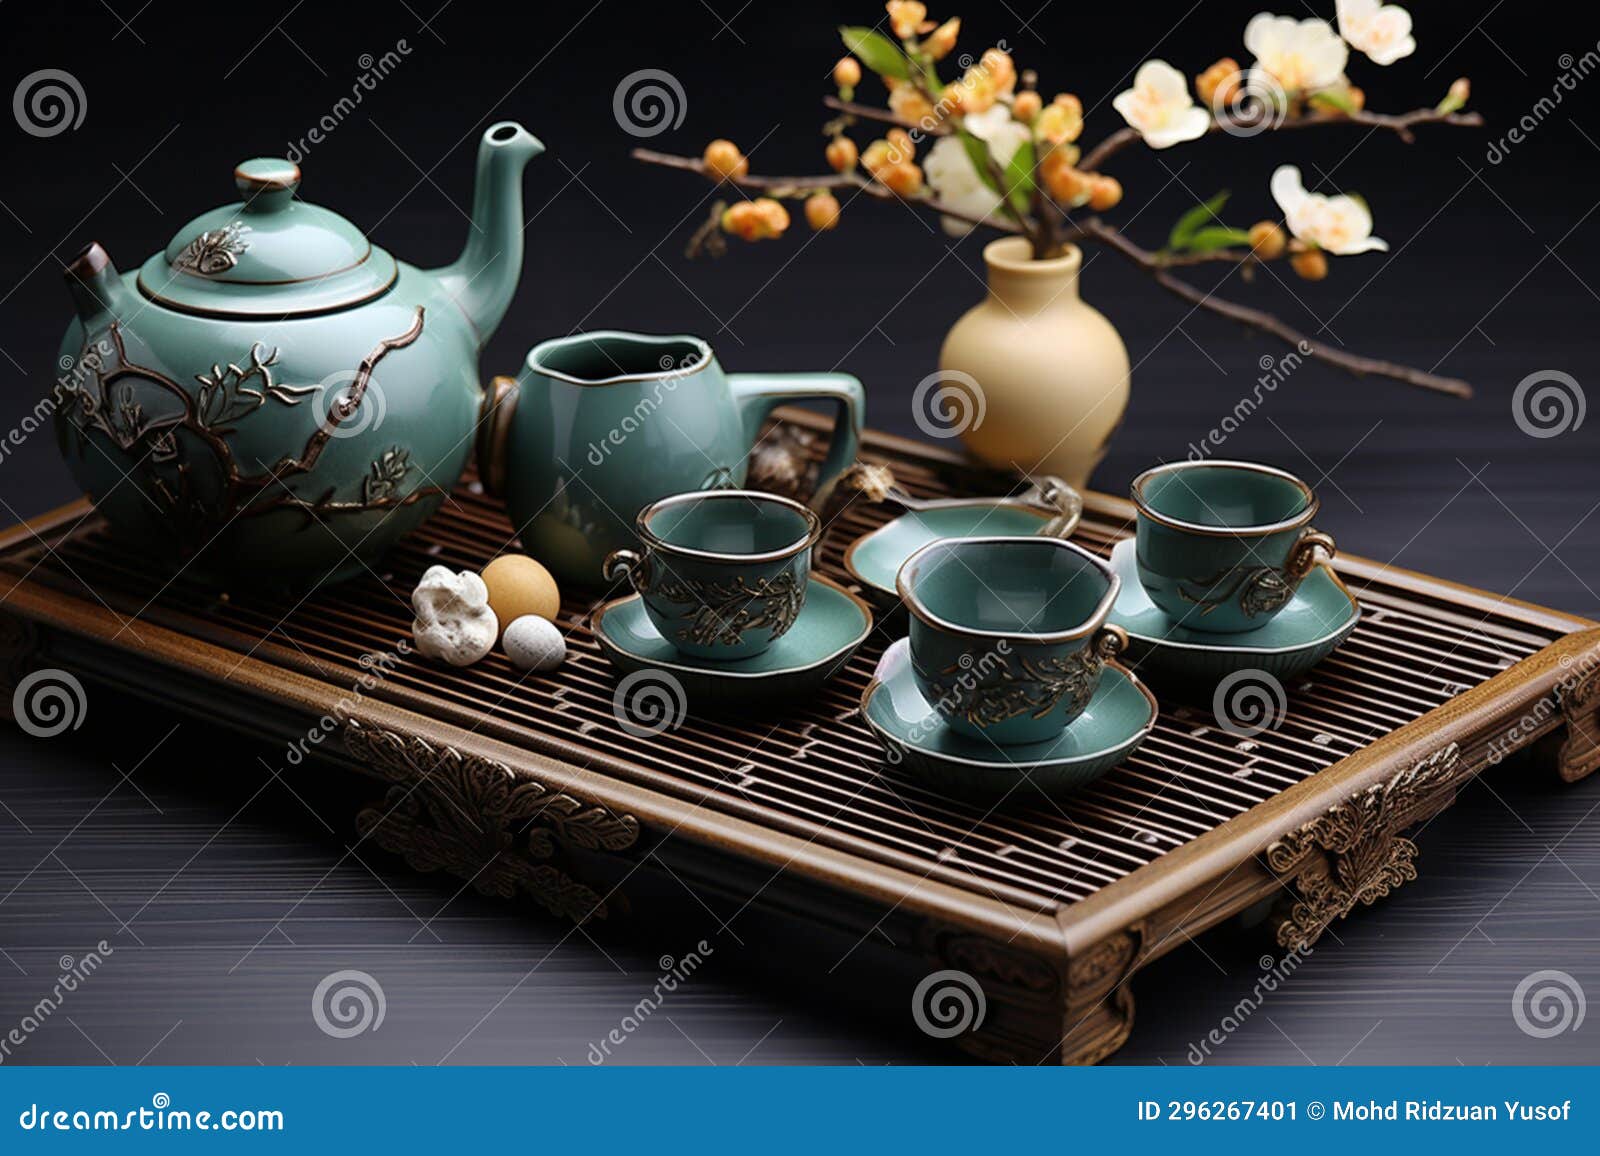 set of chinese tea ready to be served during festives